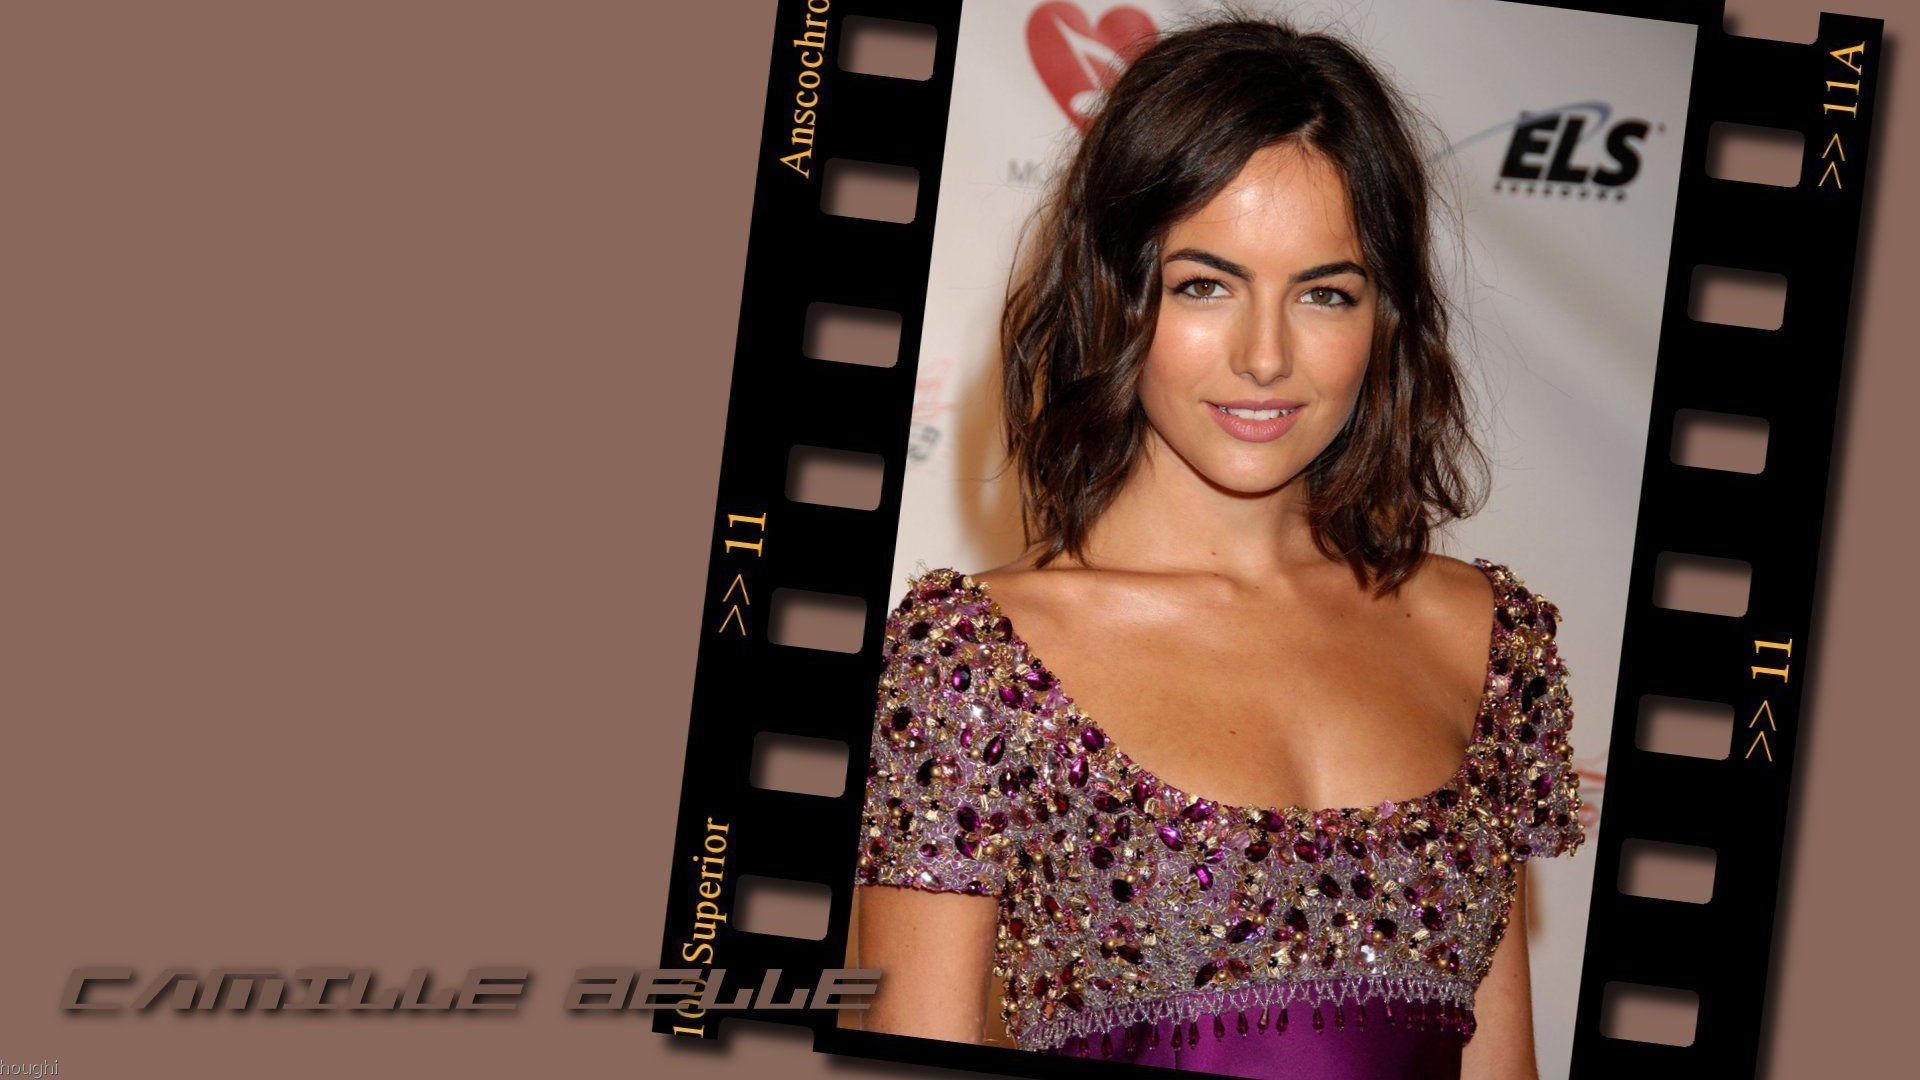 Camilla Belle #016 - 1920x1080 Wallpapers Pictures Photos Images